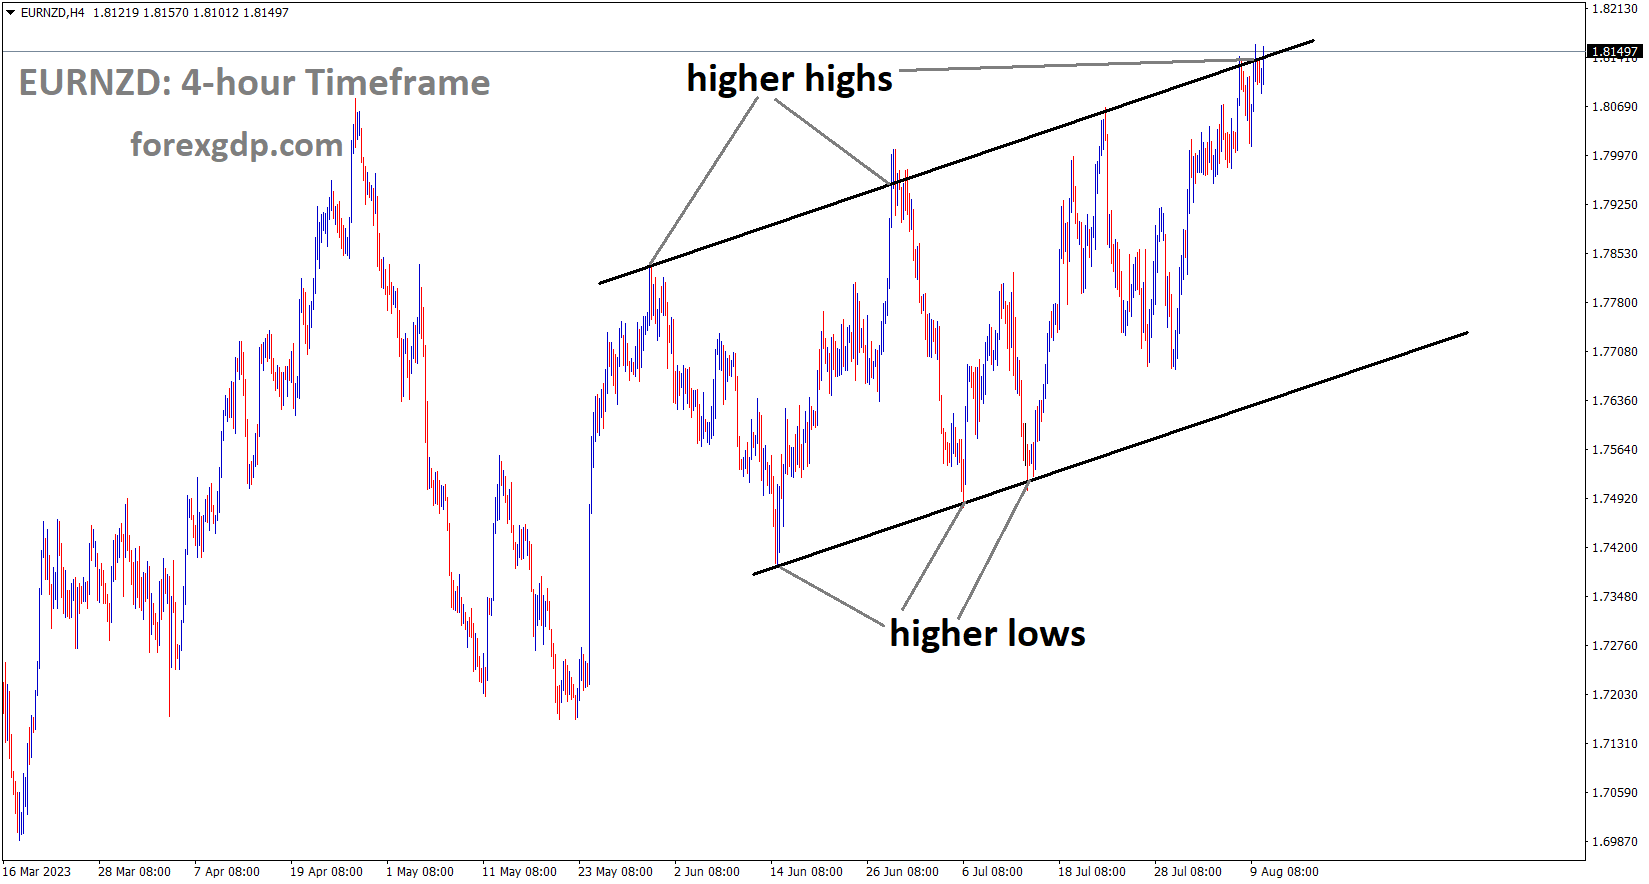 EURNZD is moving in an Ascending channel and the market has reached the higher high area of the channel